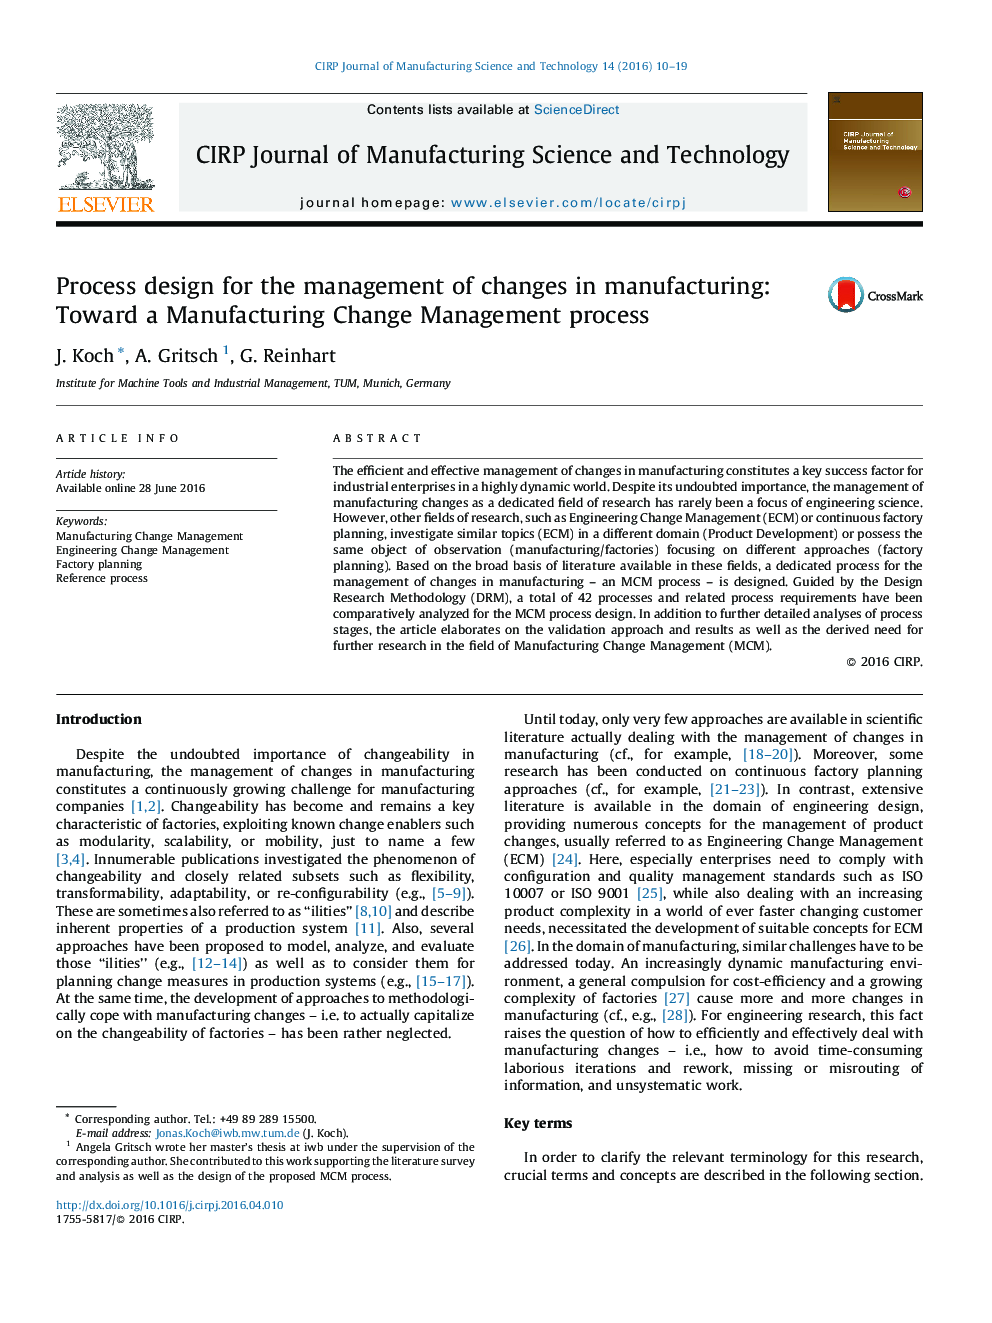 Process design for the management of changes in manufacturing: Toward a Manufacturing Change Management process